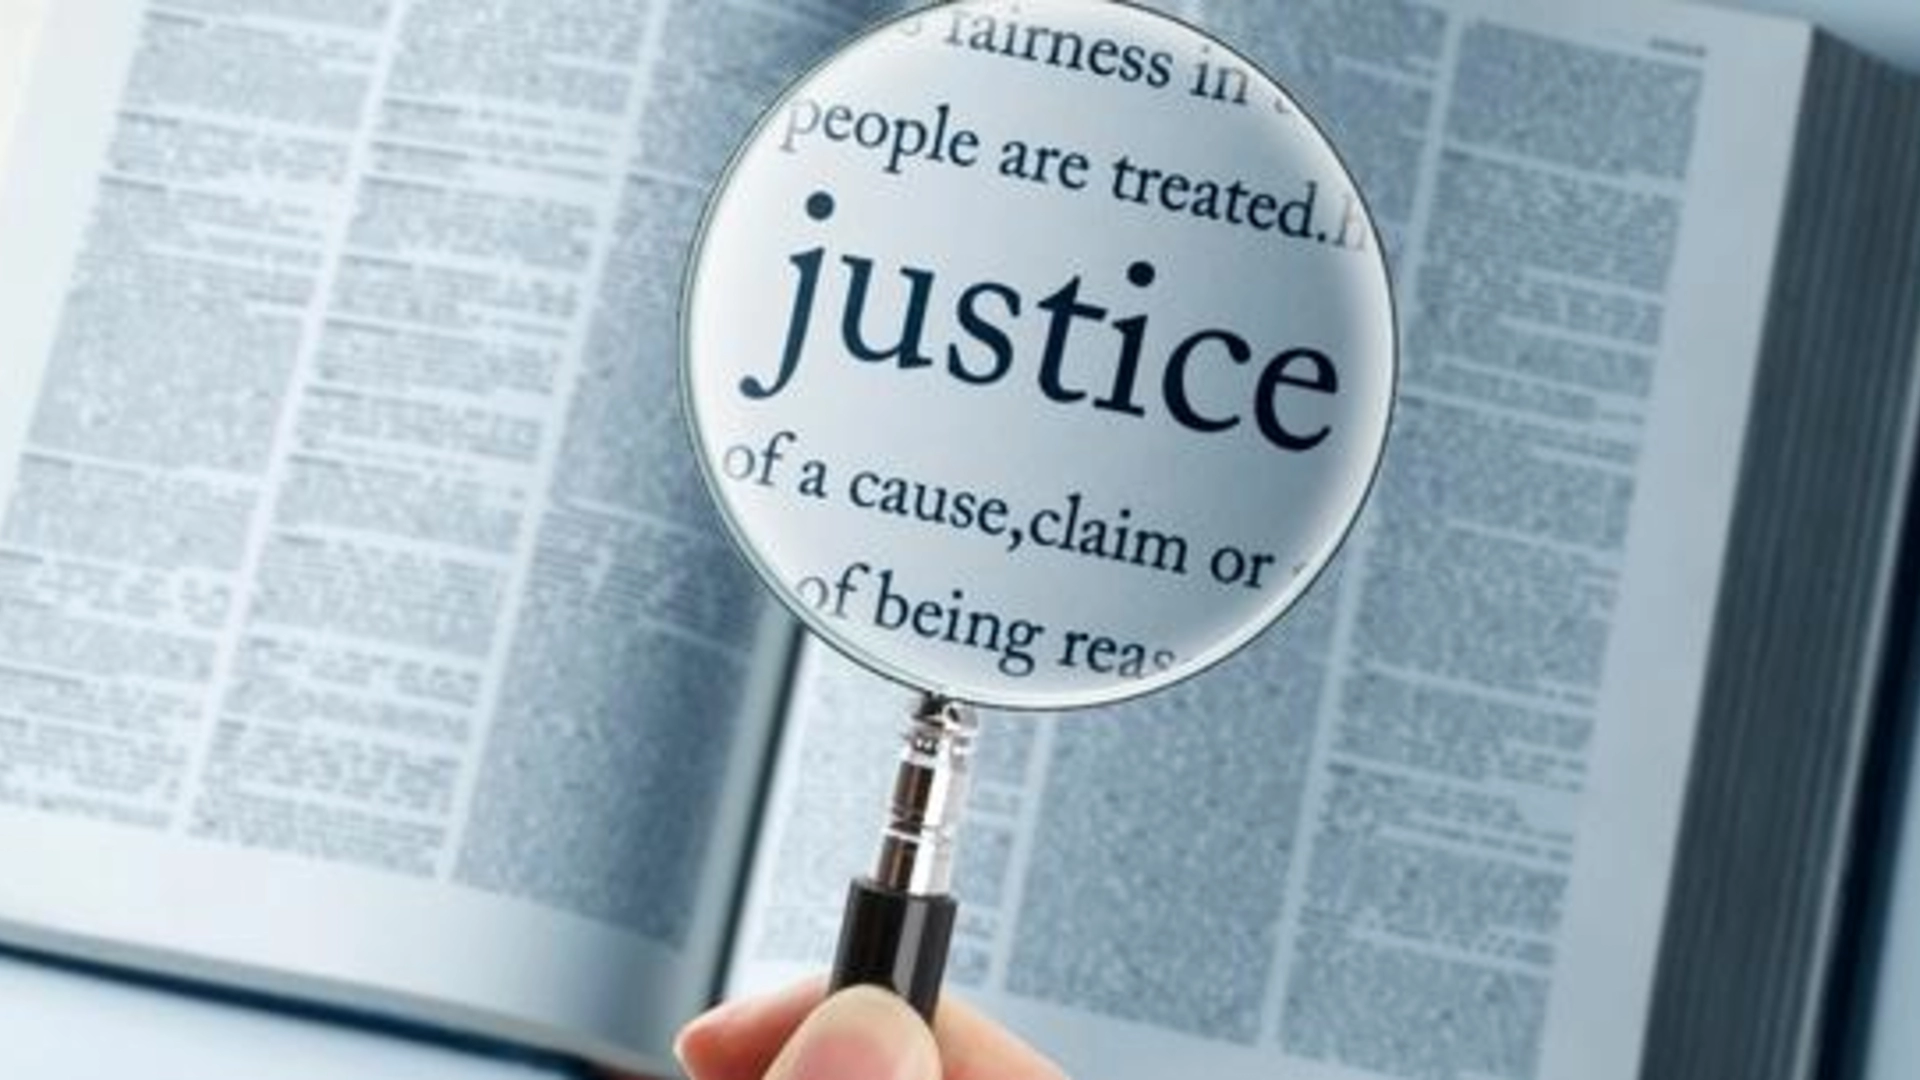 The word "justice" that is in a book and enlarged under a magnifying glass.